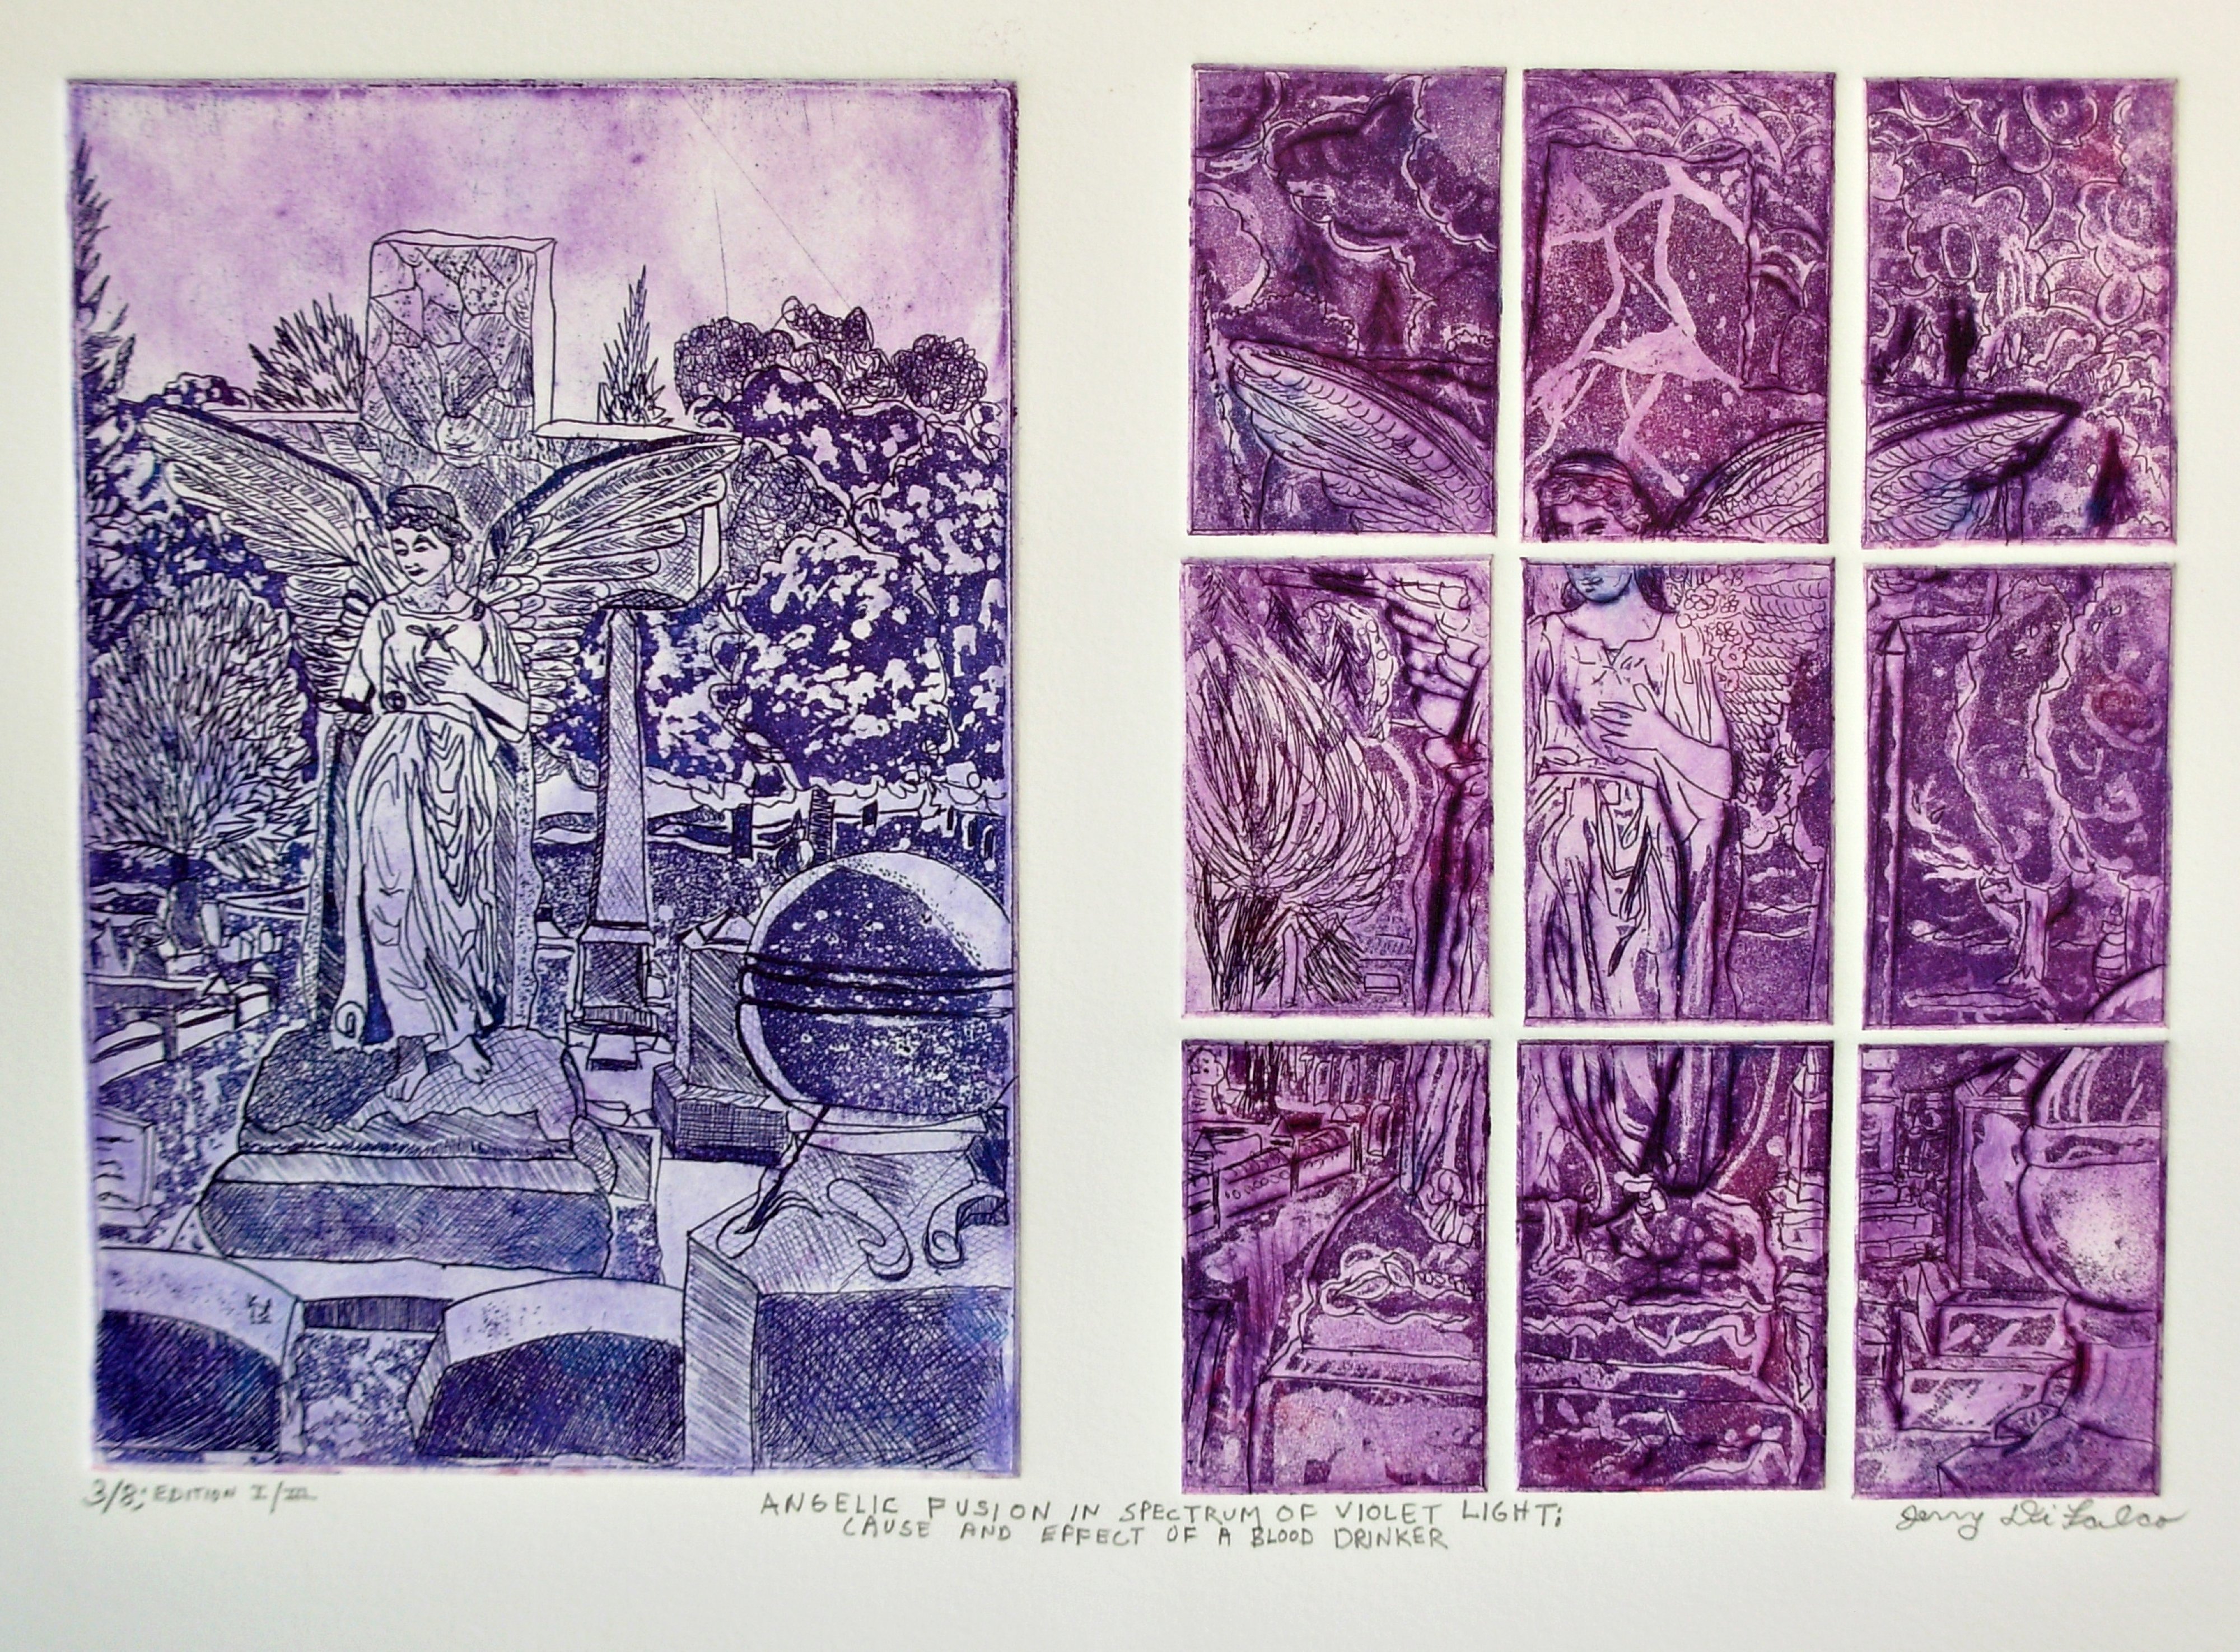 Jerry  Di Falco: 'ANGELIC FUSION', 2014 Etching, Mystical. ANGELIC FUSION OF VIOLET SPECTRUM OR CAUSE AND EFFECT OF LIGHT UPON A BLOOD DRINKER. This etching is executed in oil based etching inks on RivesBFK white paper. The printmaking techniques used included aquatint, drypoint, and intaglio. TEN zinc plates were used in this diptych style design the plate edges, ...